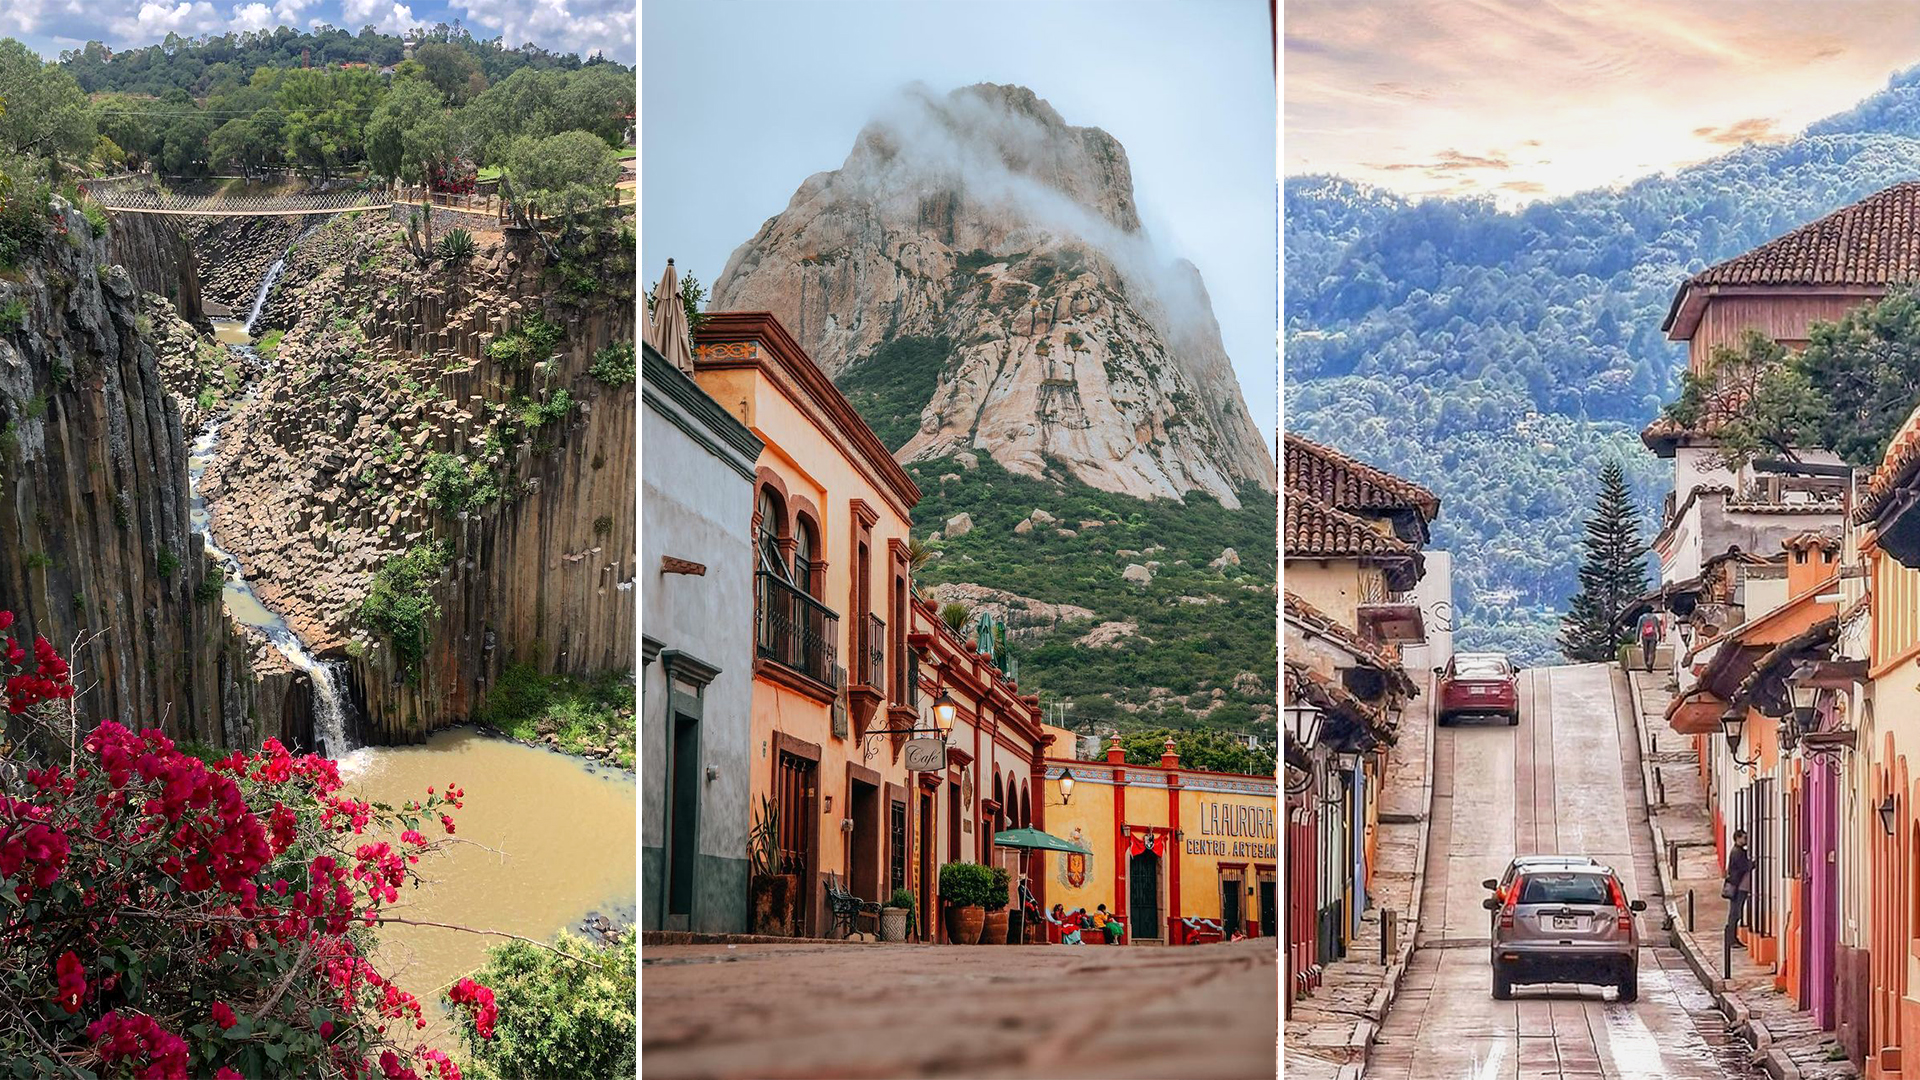 Currently there are 132 towns throughout Mexico that have the recognition of Magical Towns (Photos: Instagram @cristiverdin / @chrislejarazu / @sancristobaldelascasas)